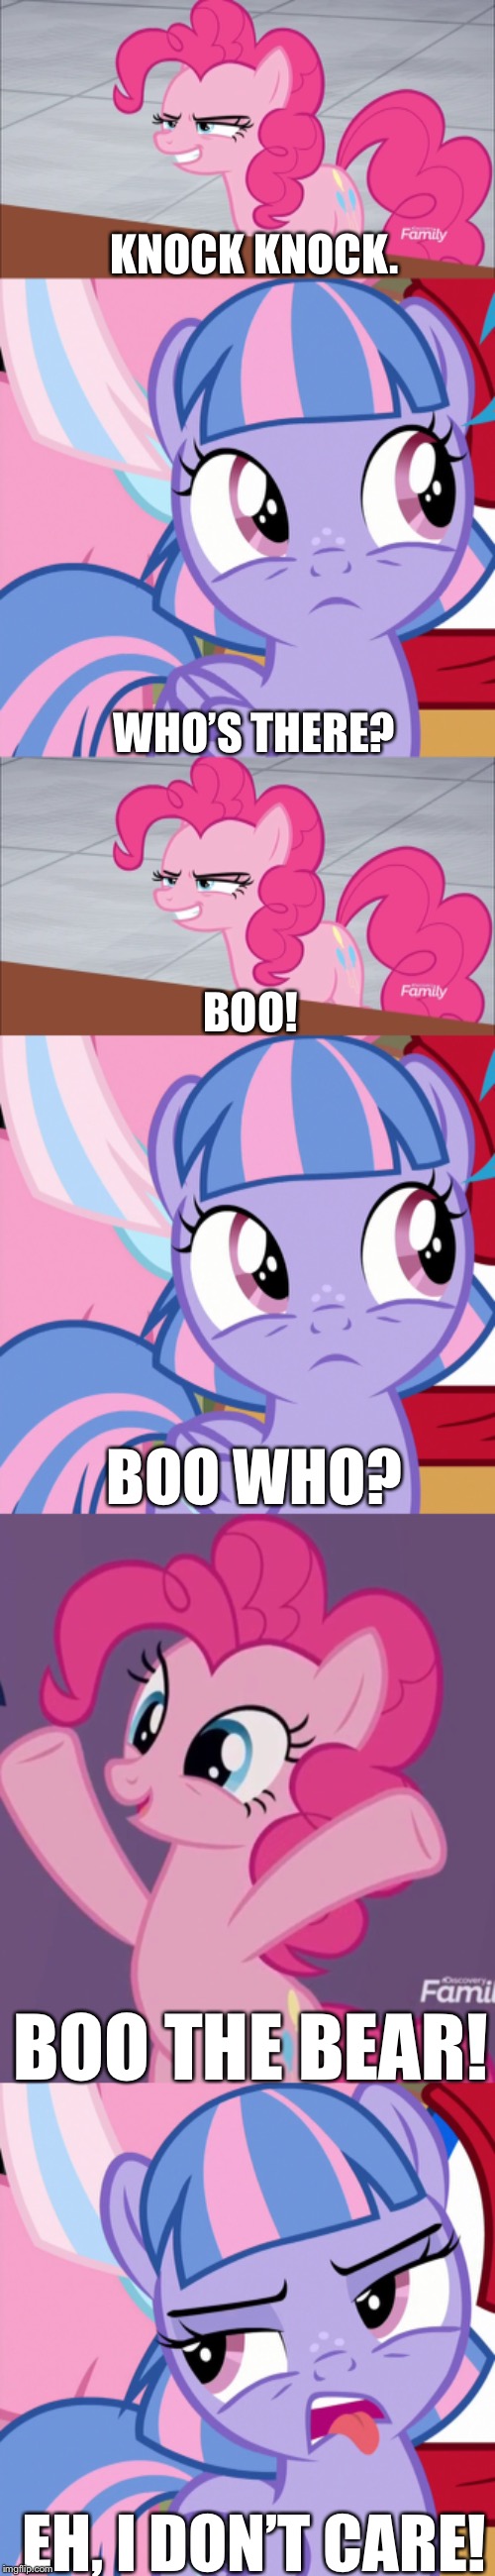 Pinkie pie Knock Knock jokes to Wind Sprint | KNOCK KNOCK. WHO’S THERE? BOO! BOO WHO? BOO THE BEAR! EH, I DON’T CARE! | image tagged in mlp fim,pinkie pie,wind,my little pony | made w/ Imgflip meme maker